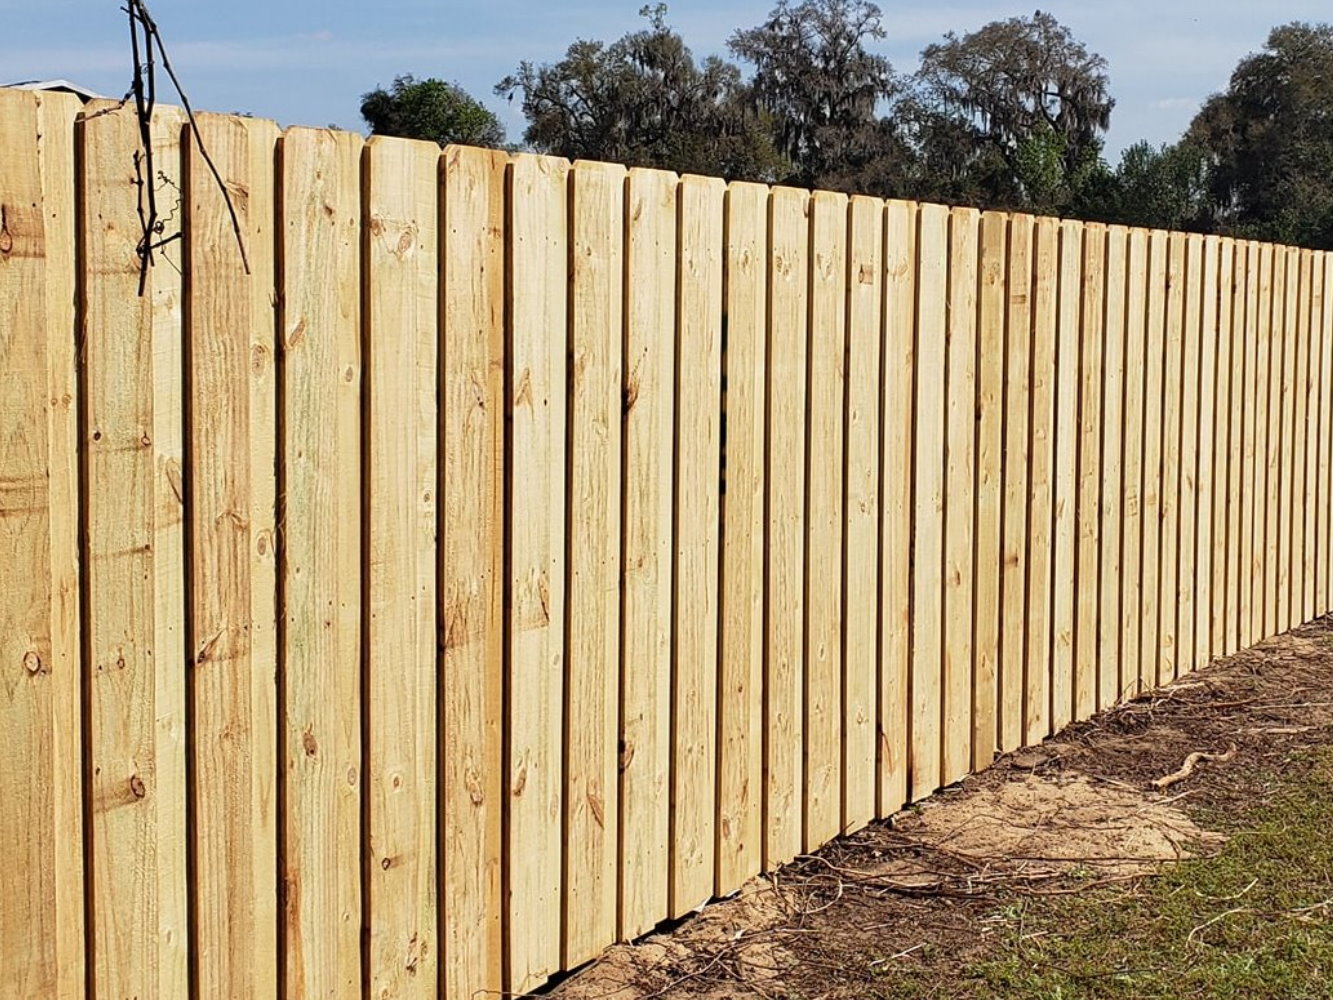 Silver Springs Florida Fence Project Photo